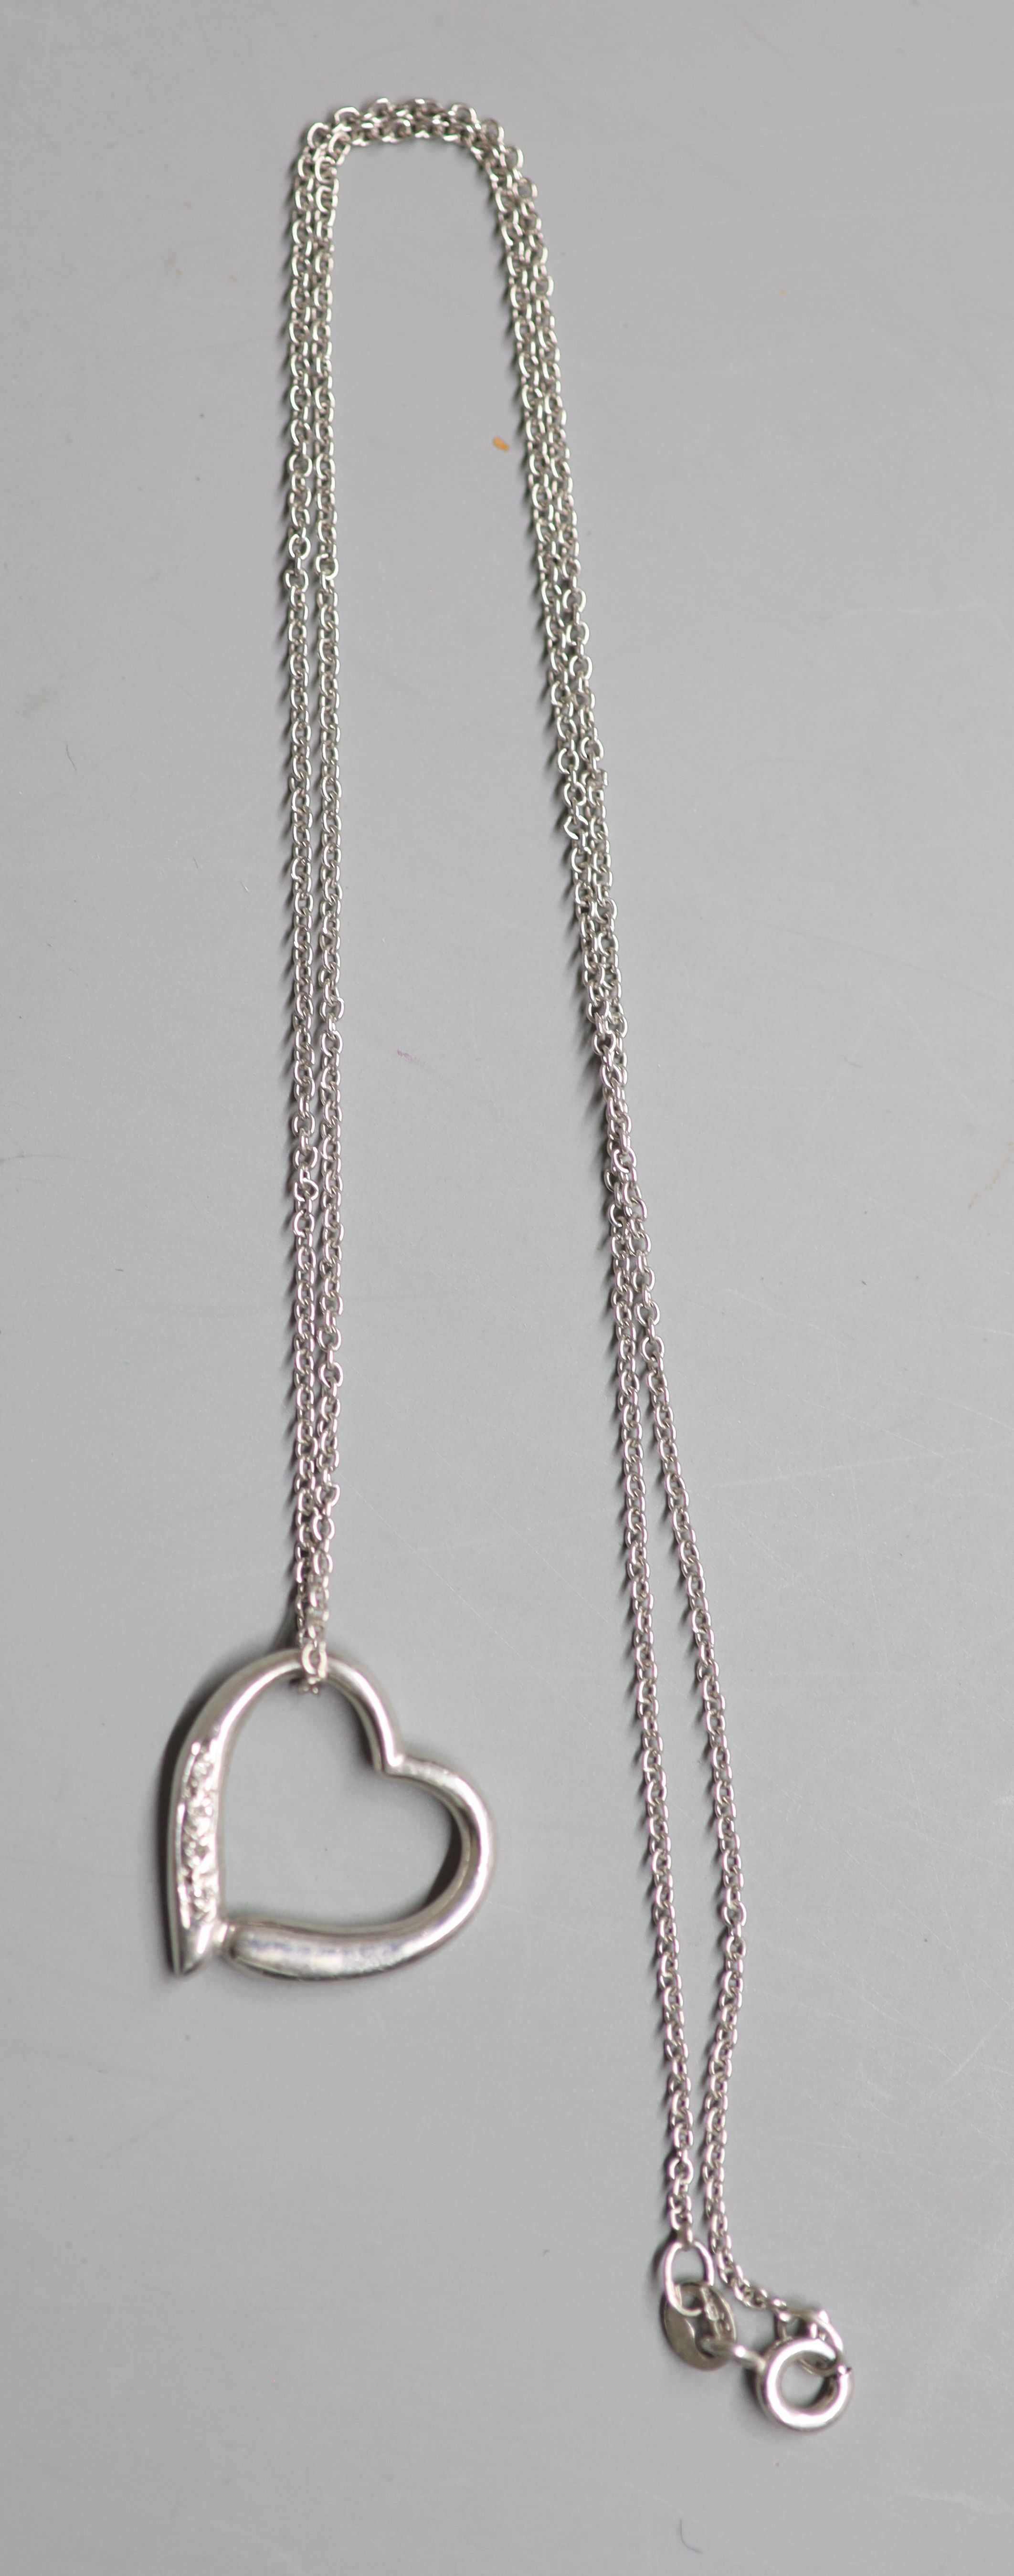 A modern 9ct white gold and diamond chip set openwork heart pendant, 18mm, on a 9ct white gold chain, 39cm, gross 3.8 grams.